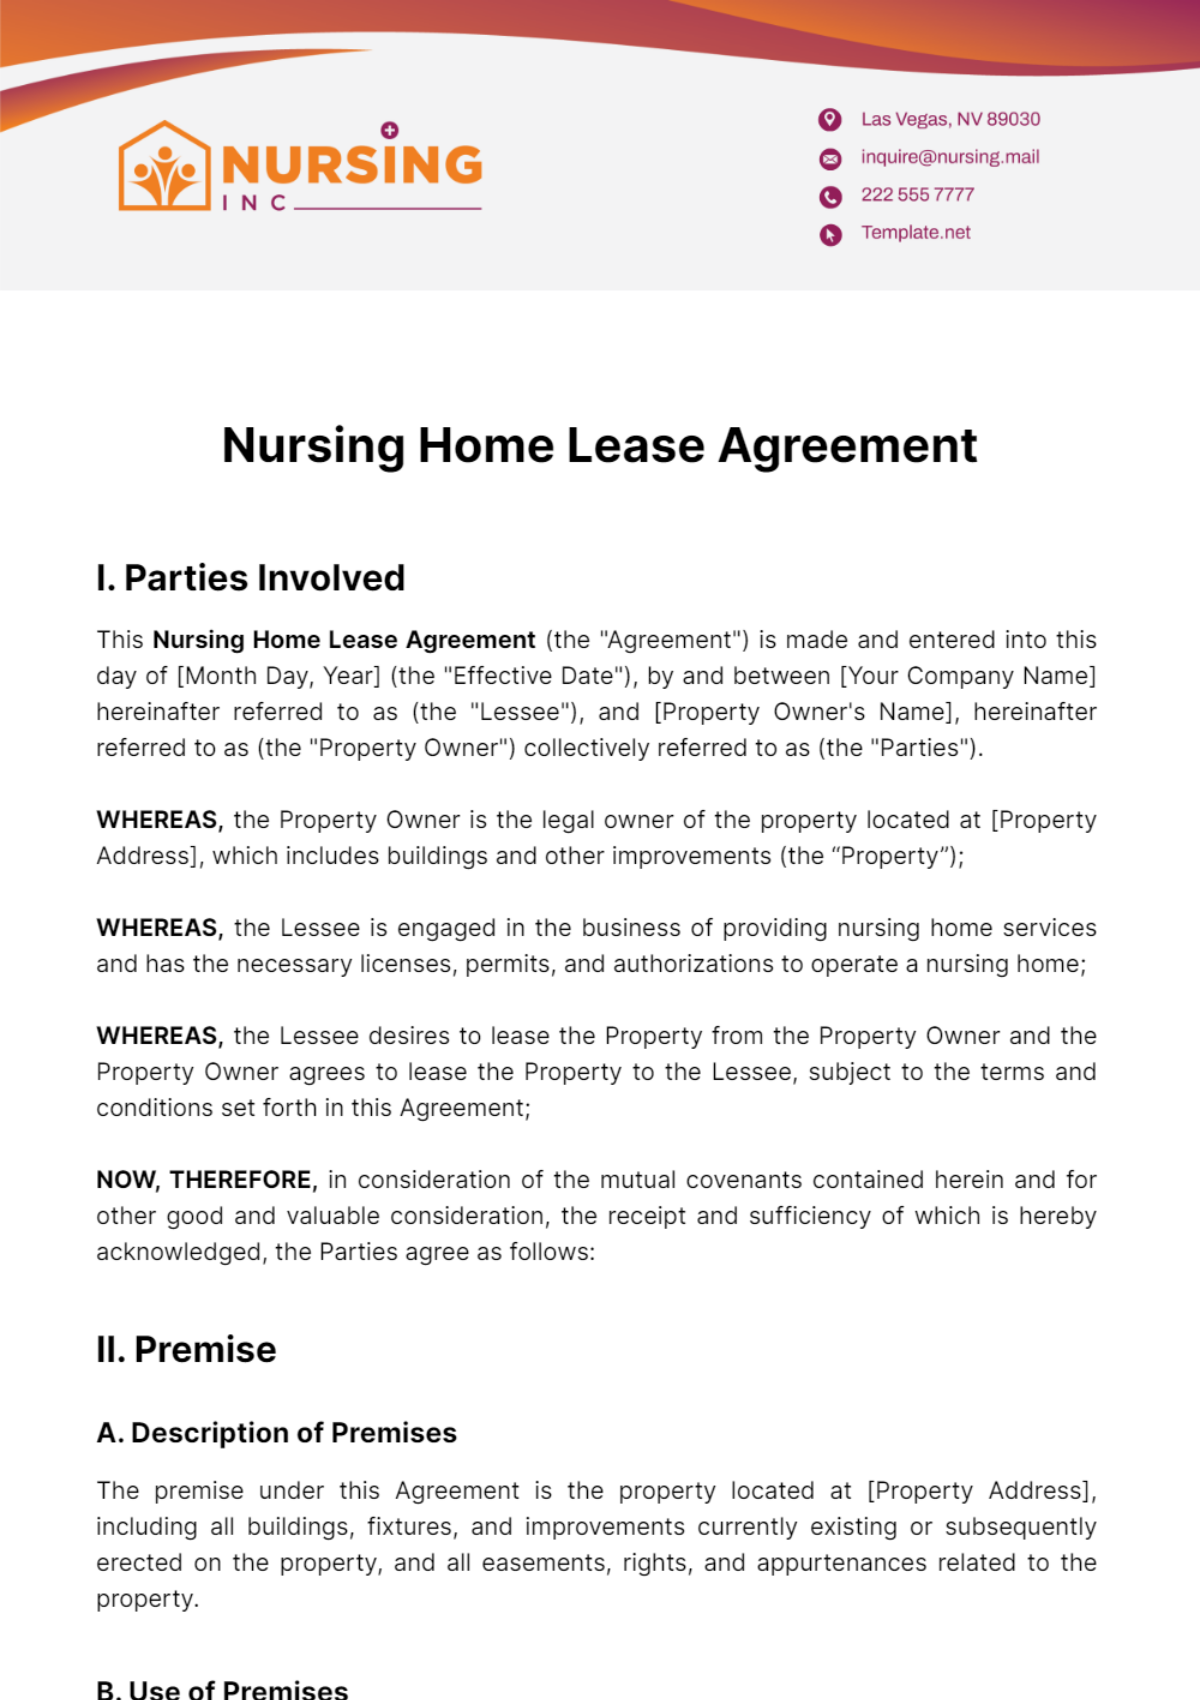 Nursing Home Lease Agreement Template